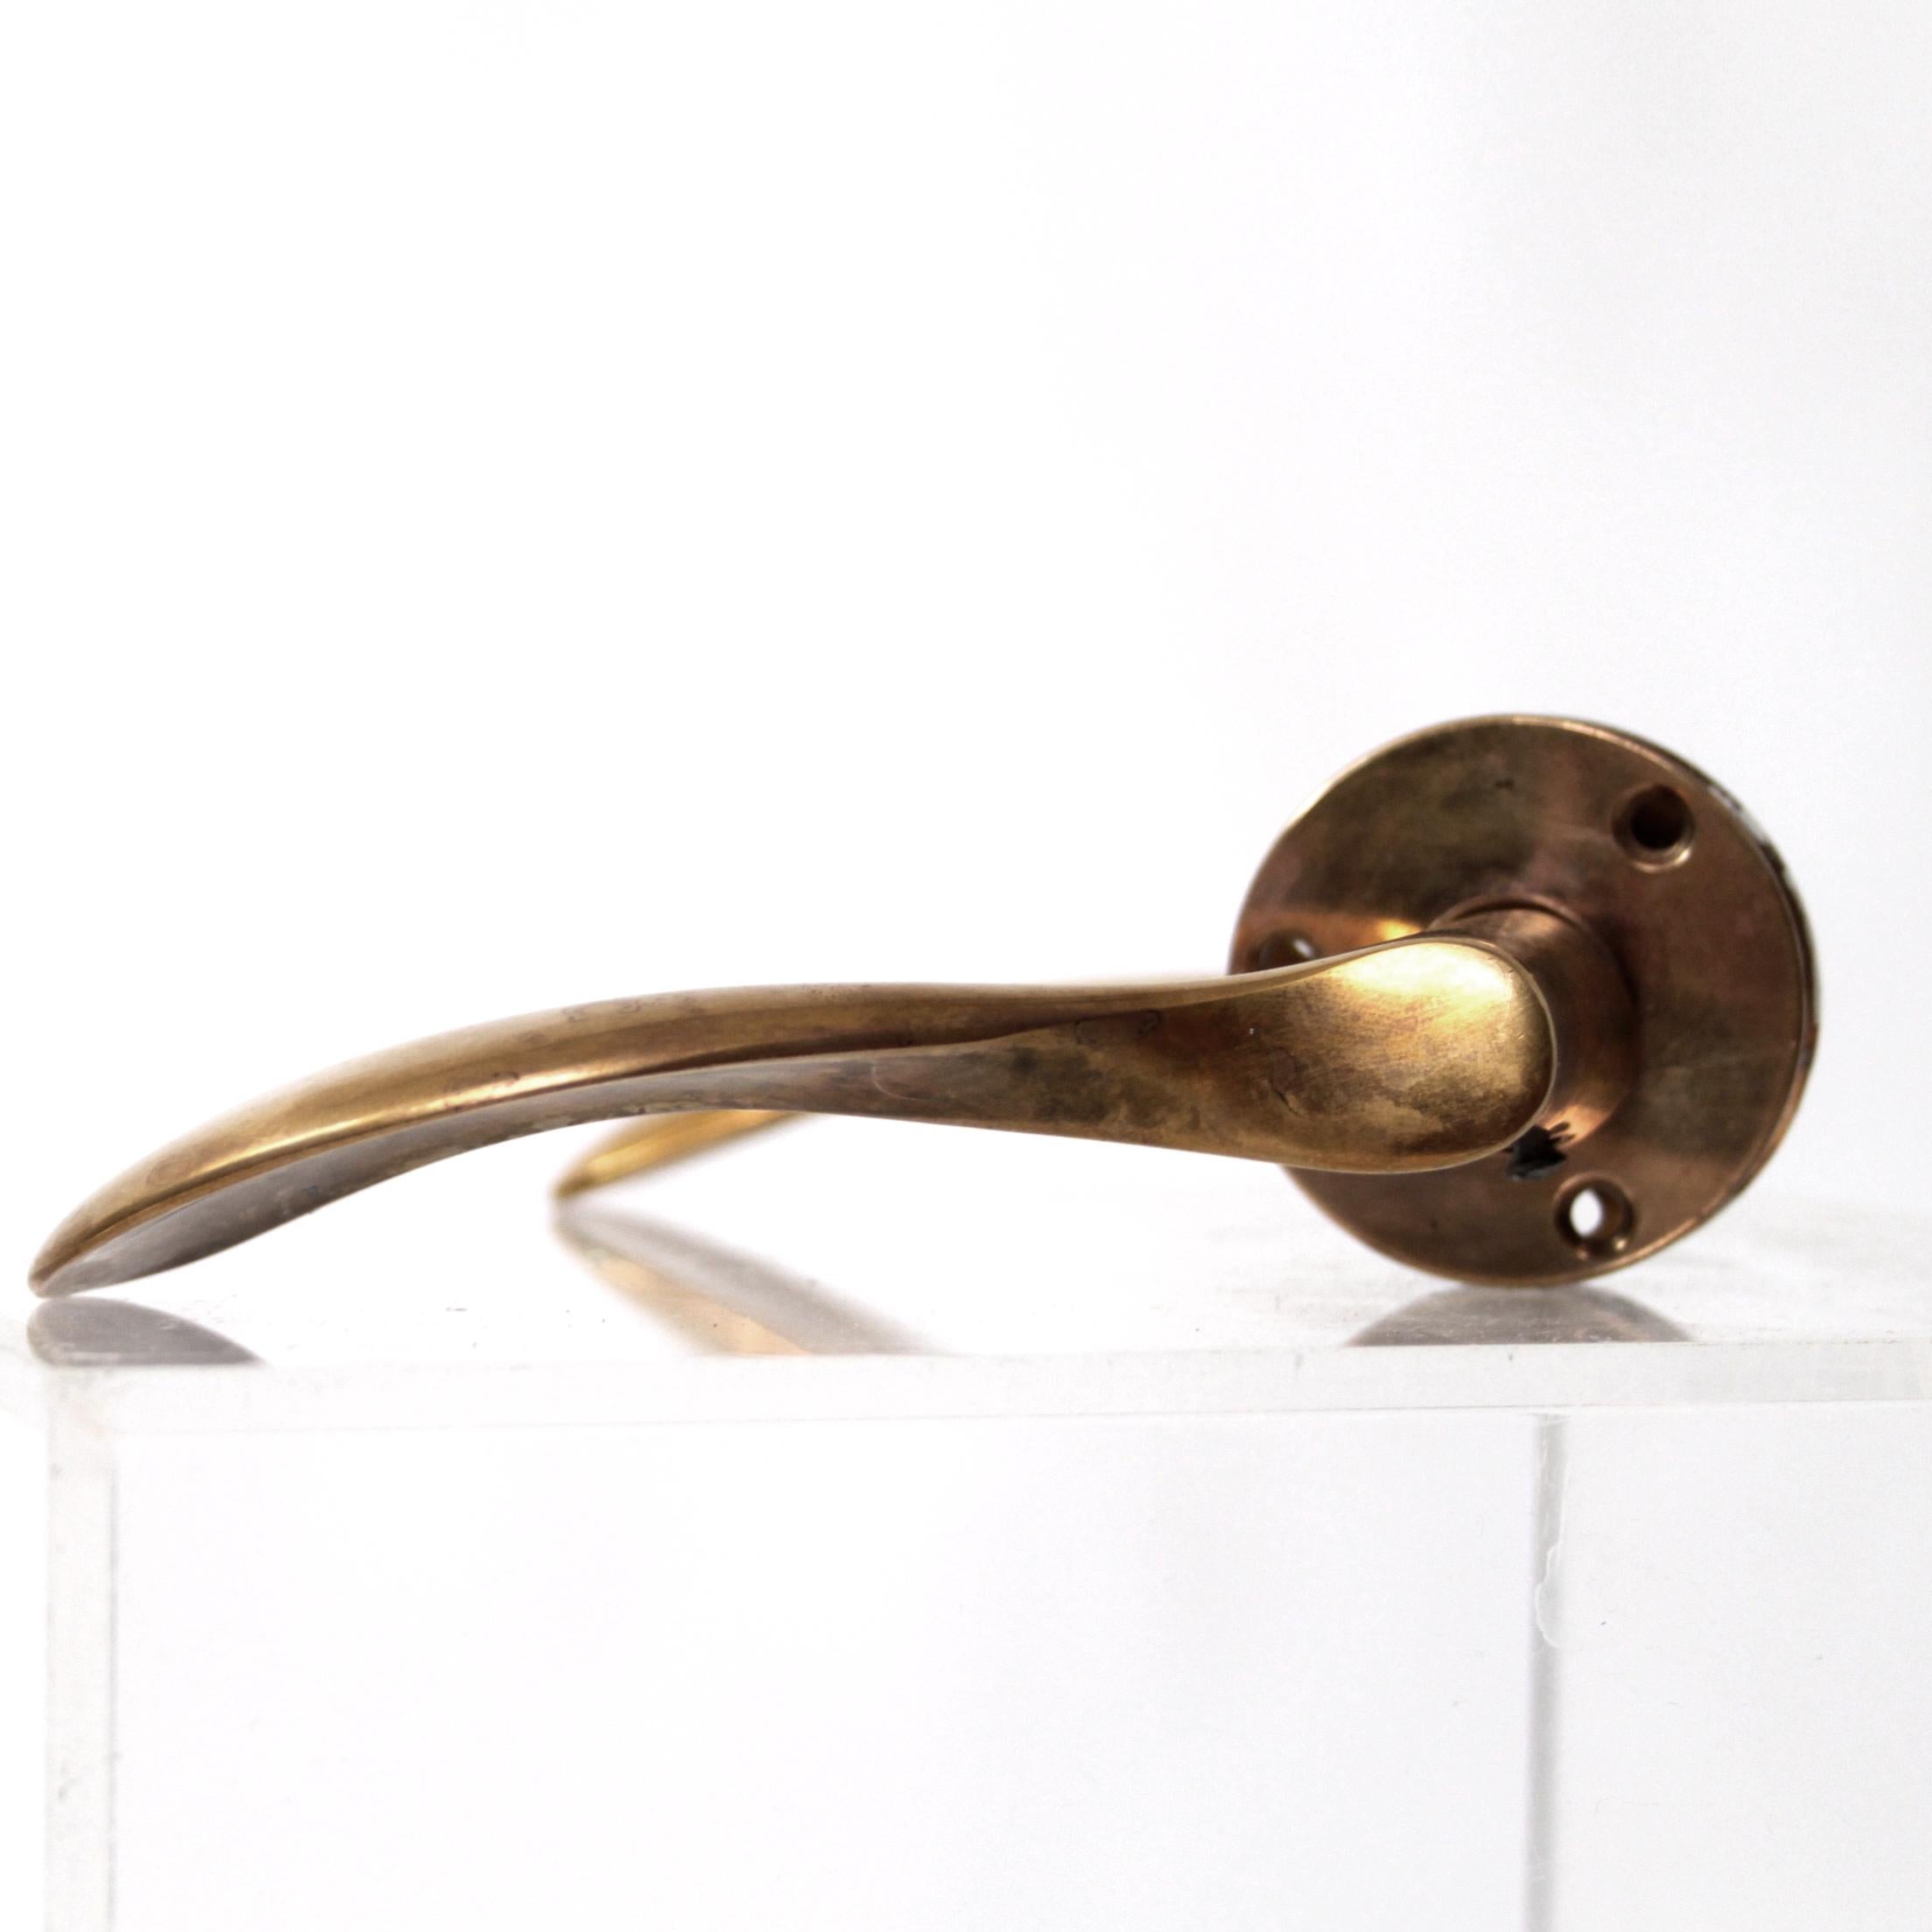 Polished Arne Jacobsen Solid Brass Door Handles with Patina For Sale